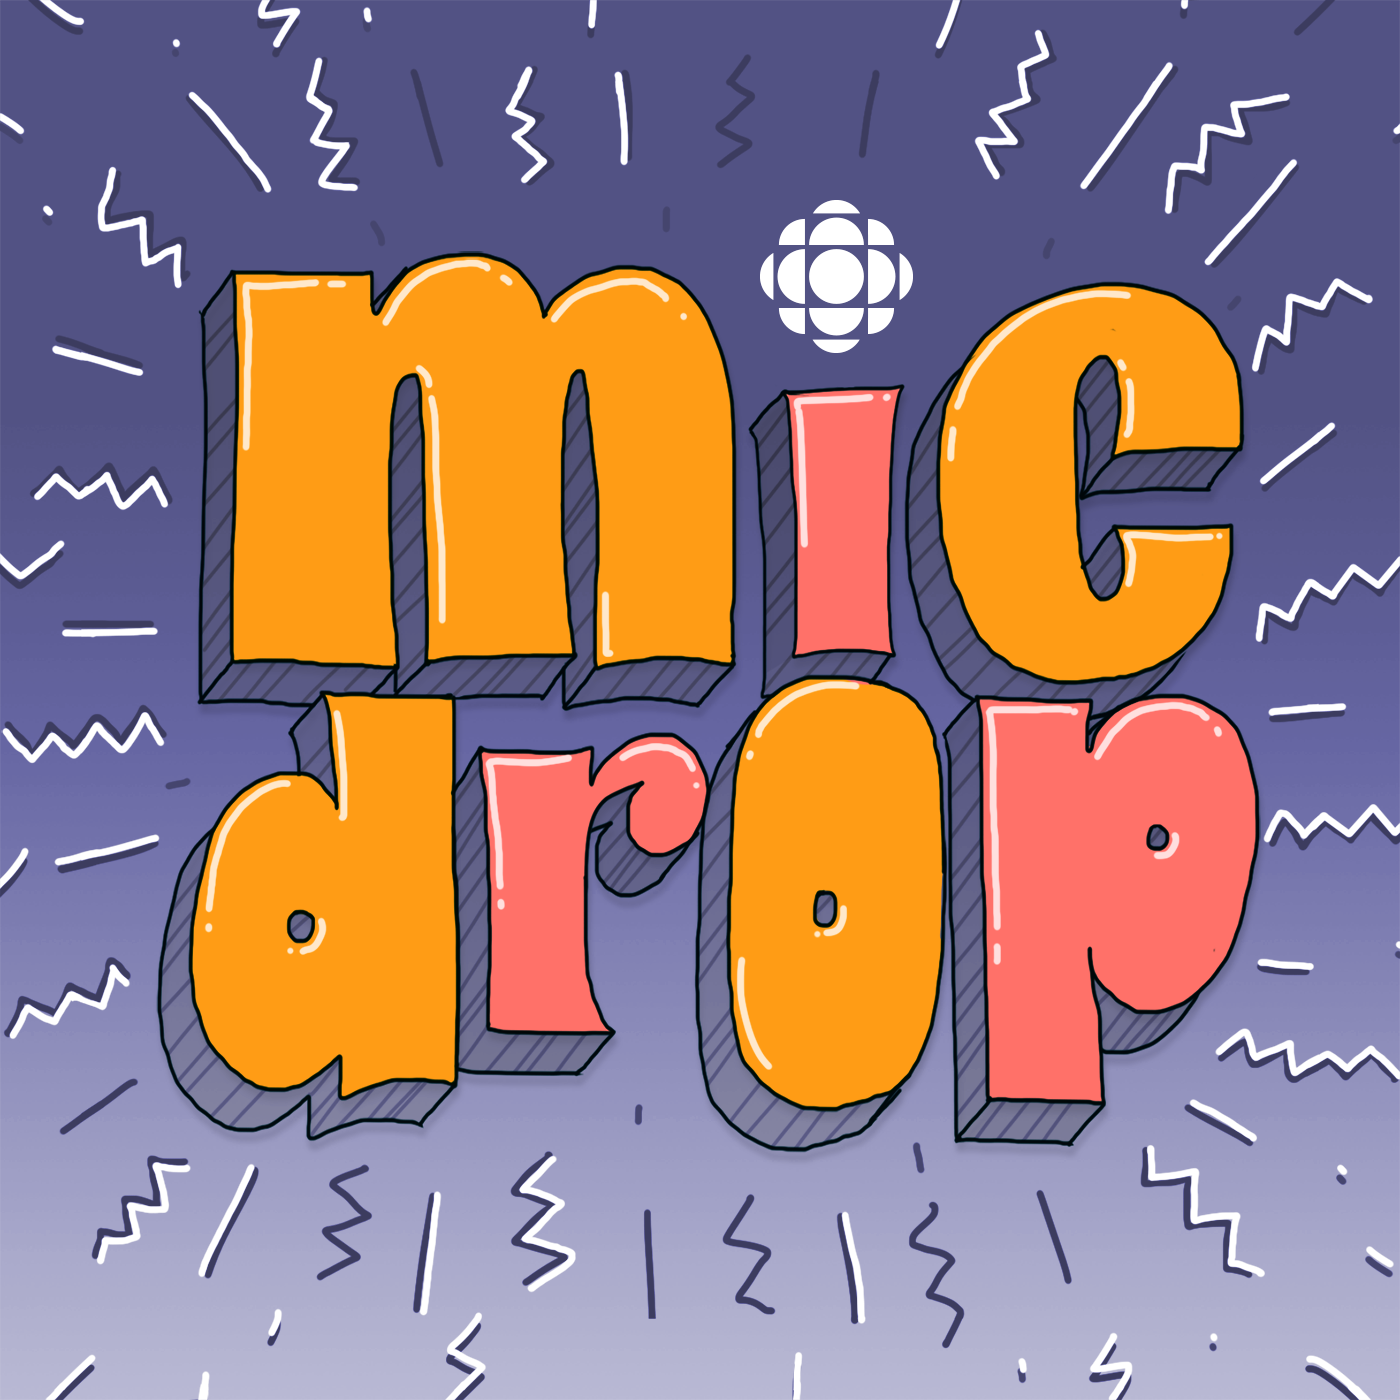 Mic Drop from CBC Podcasts:CBC Podcasts and TRAX from PRX